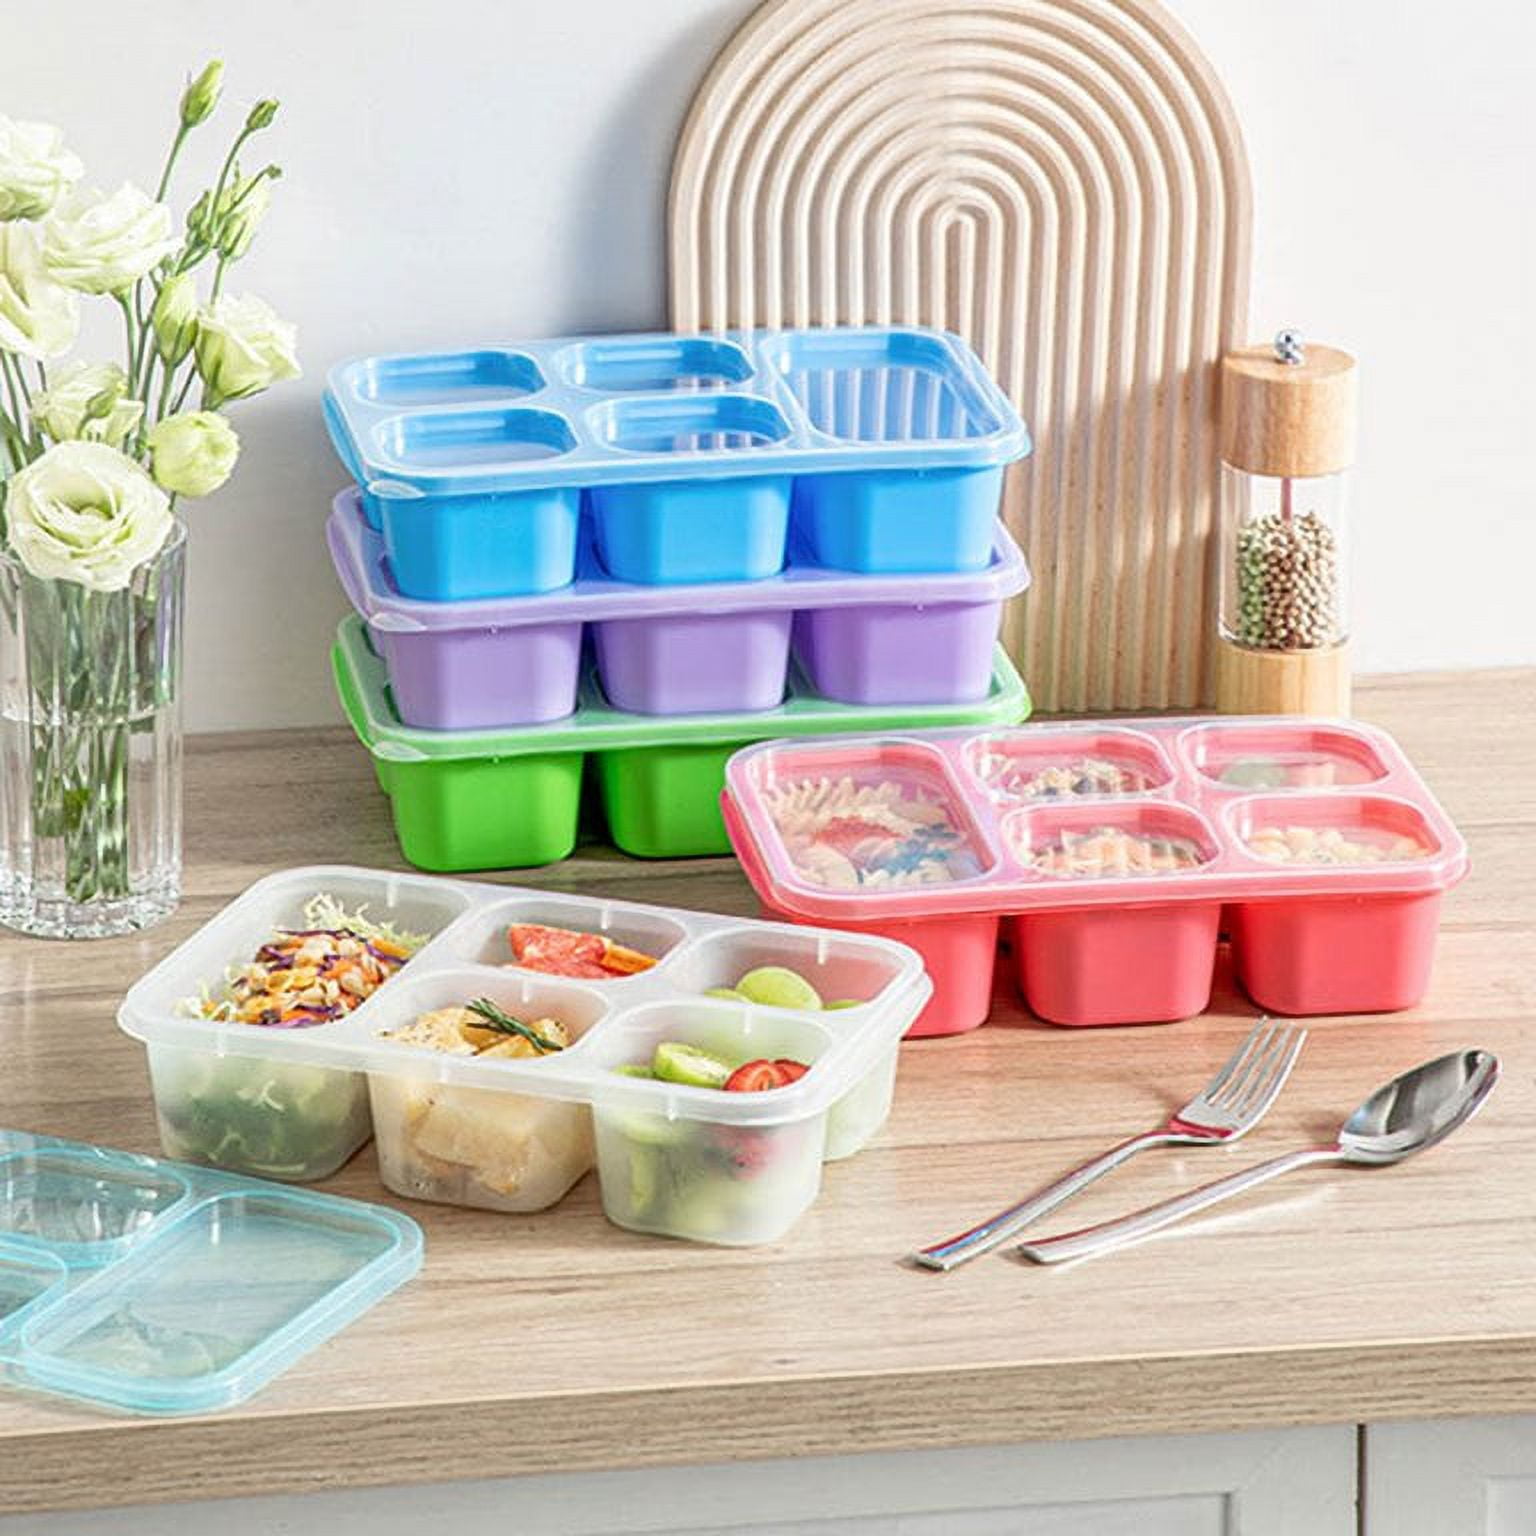 New 4 Pack Snack Containers with Clear Lids 4 Compartment Bento